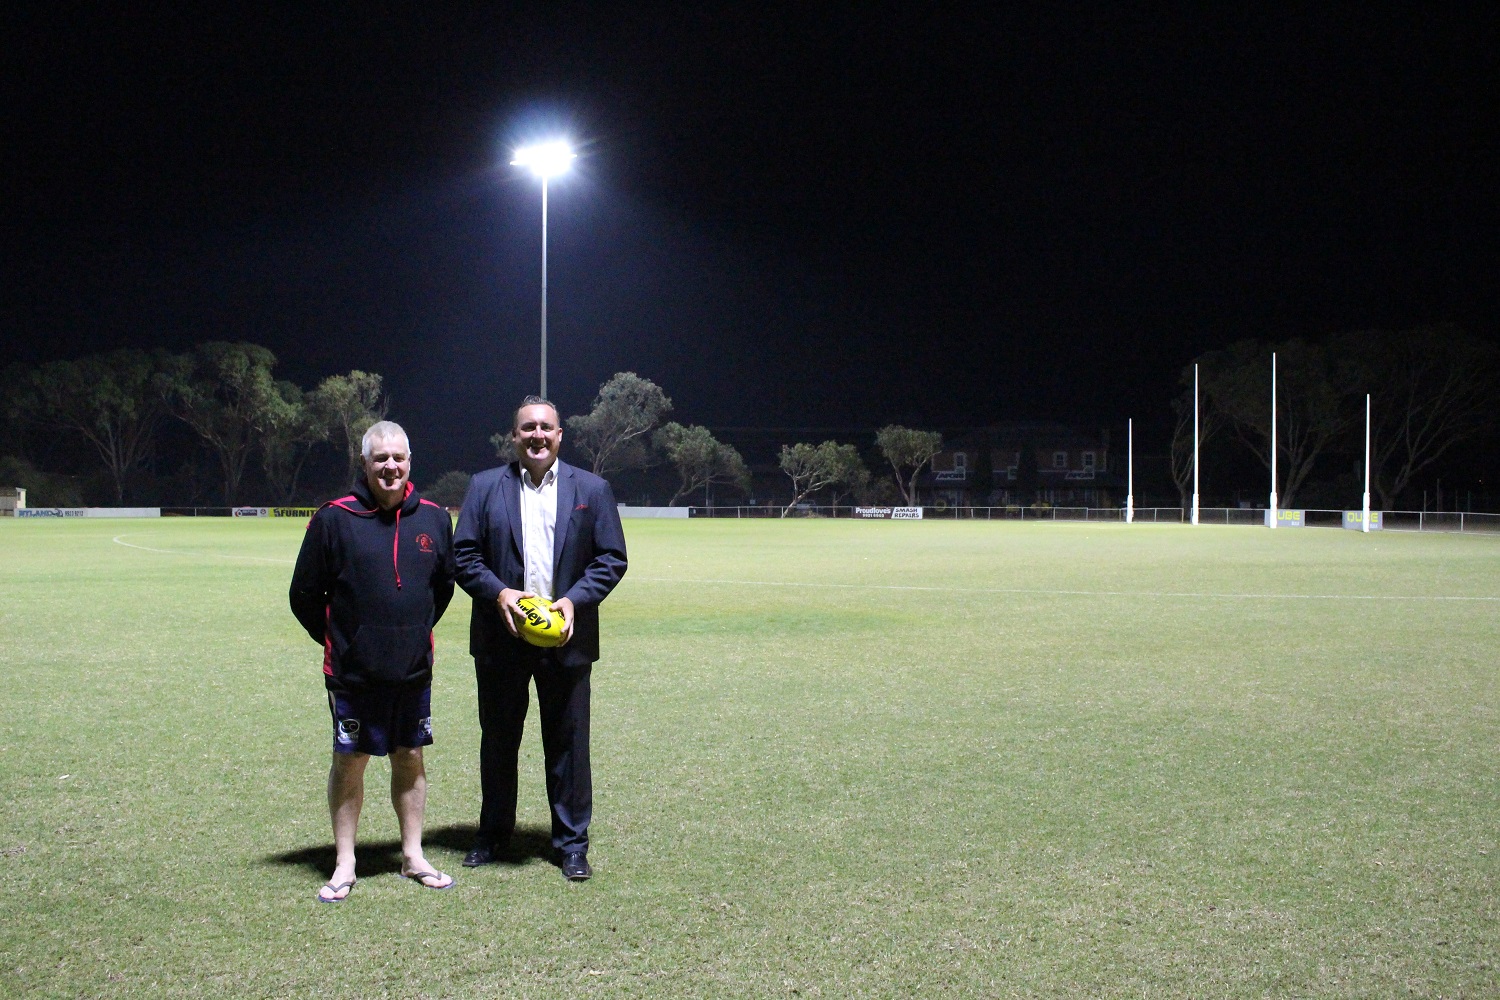 Under the lights at Greenough Oval